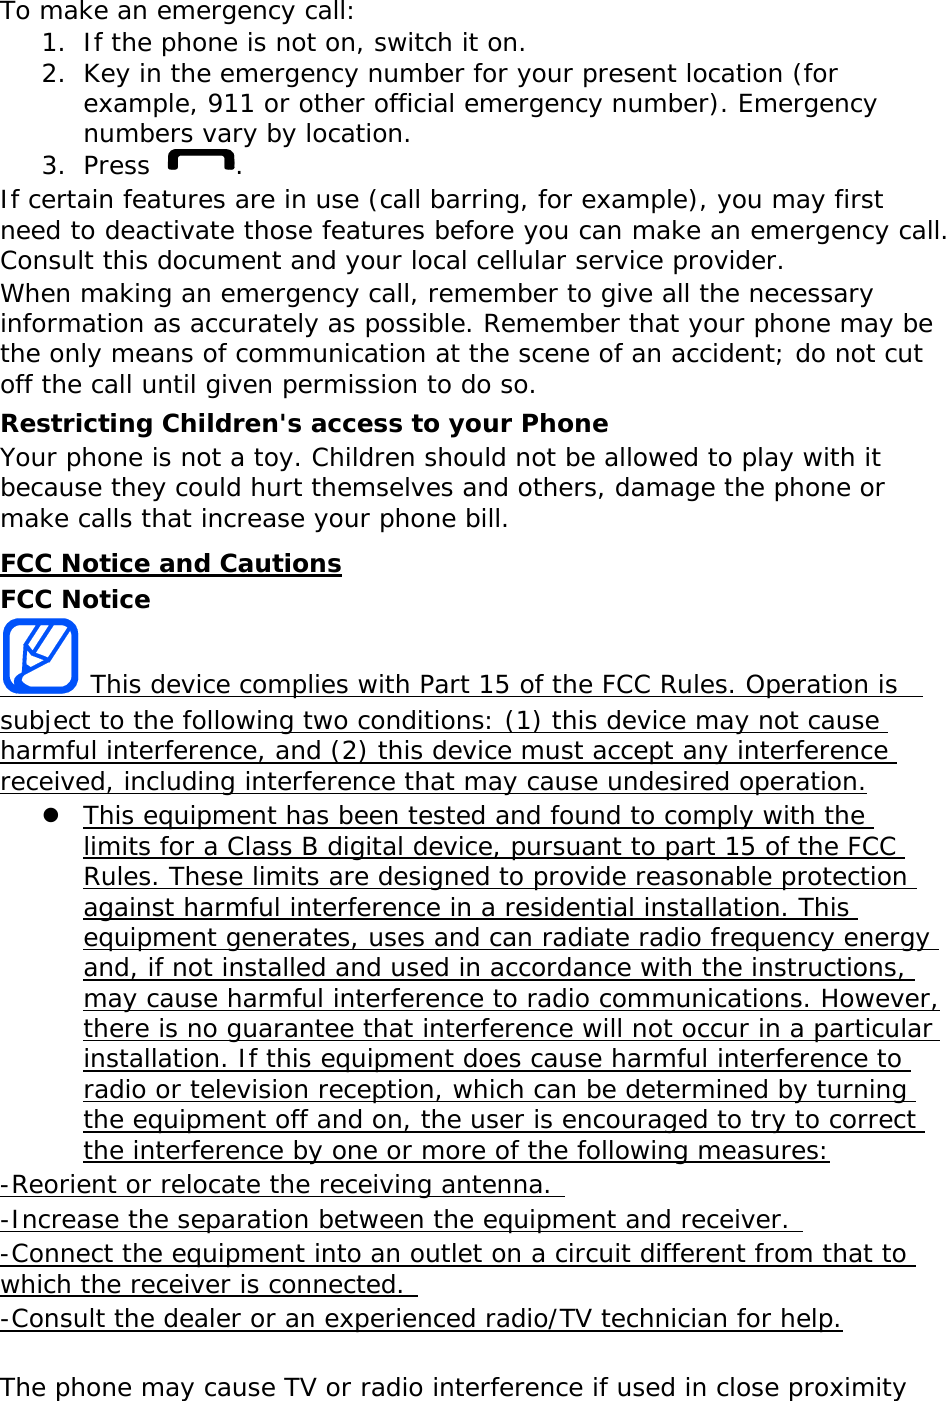 To make an emergency call: 1. If the phone is not on, switch it on. 2. Key in the emergency number for your present location (for example, 911 or other official emergency number). Emergency numbers vary by location. 3. Press . If certain features are in use (call barring, for example), you may first need to deactivate those features before you can make an emergency call. Consult this document and your local cellular service provider. When making an emergency call, remember to give all the necessary information as accurately as possible. Remember that your phone may be the only means of communication at the scene of an accident; do not cut off the call until given permission to do so. Restricting Children&apos;s access to your Phone Your phone is not a toy. Children should not be allowed to play with it because they could hurt themselves and others, damage the phone or make calls that increase your phone bill. FCC Notice and Cautions FCC Notice  This device complies with Part 15 of the FCC Rules. Operation is  subject to the following two conditions: (1) this device may not cause harmful interference, and (2) this device must accept any interference received, including interference that may cause undesired operation.  This equipment has been tested and found to comply with the limits for a Class B digital device, pursuant to part 15 of the FCC Rules. These limits are designed to provide reasonable protection against harmful interference in a residential installation. This equipment generates, uses and can radiate radio frequency energy and, if not installed and used in accordance with the instructions, may cause harmful interference to radio communications. However, there is no guarantee that interference will not occur in a particular installation. If this equipment does cause harmful interference to radio or television reception, which can be determined by turning the equipment off and on, the user is encouraged to try to correct the interference by one or more of the following measures: -Reorient or relocate the receiving antenna.  -Increase the separation between the equipment and receiver.  -Connect the equipment into an outlet on a circuit different from that to which the receiver is connected.  -Consult the dealer or an experienced radio/TV technician for help.  The phone may cause TV or radio interference if used in close proximity 